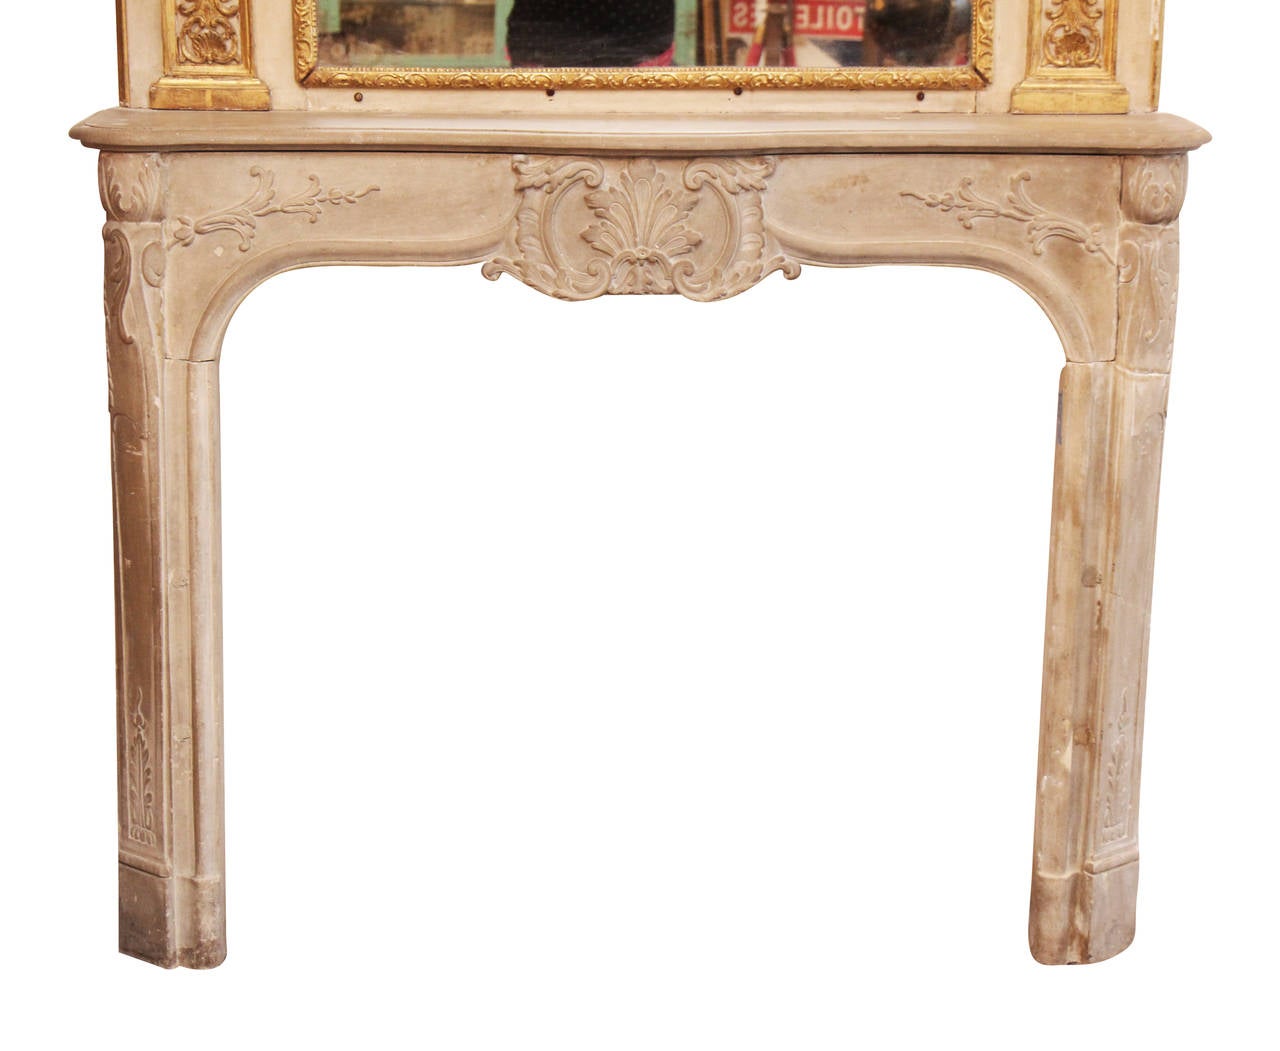 Early 20th Century 1925 Limestone Mantel with Large Gilded Overmantel Mirror and Original Sconces